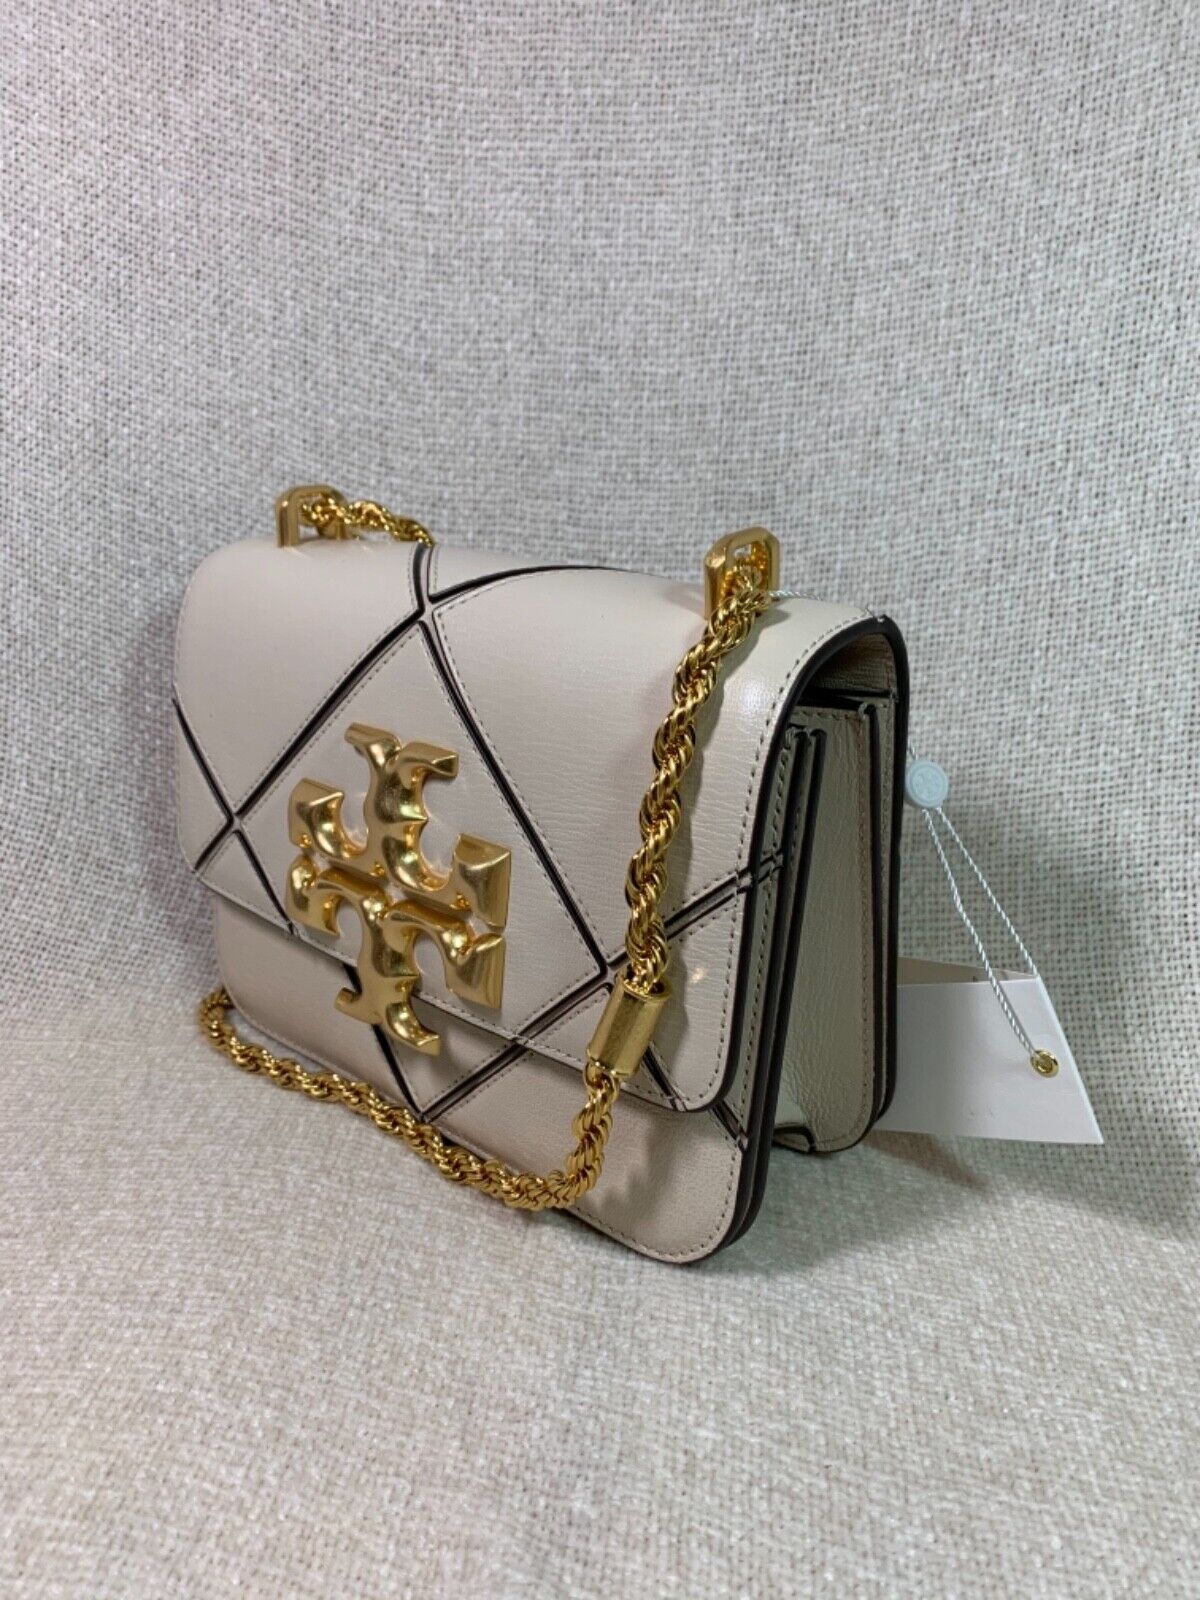 NEW Tory Burch New Cream Small Diamond Quilted Eleanor Shoulder Bag $748  192485900101 | eBay